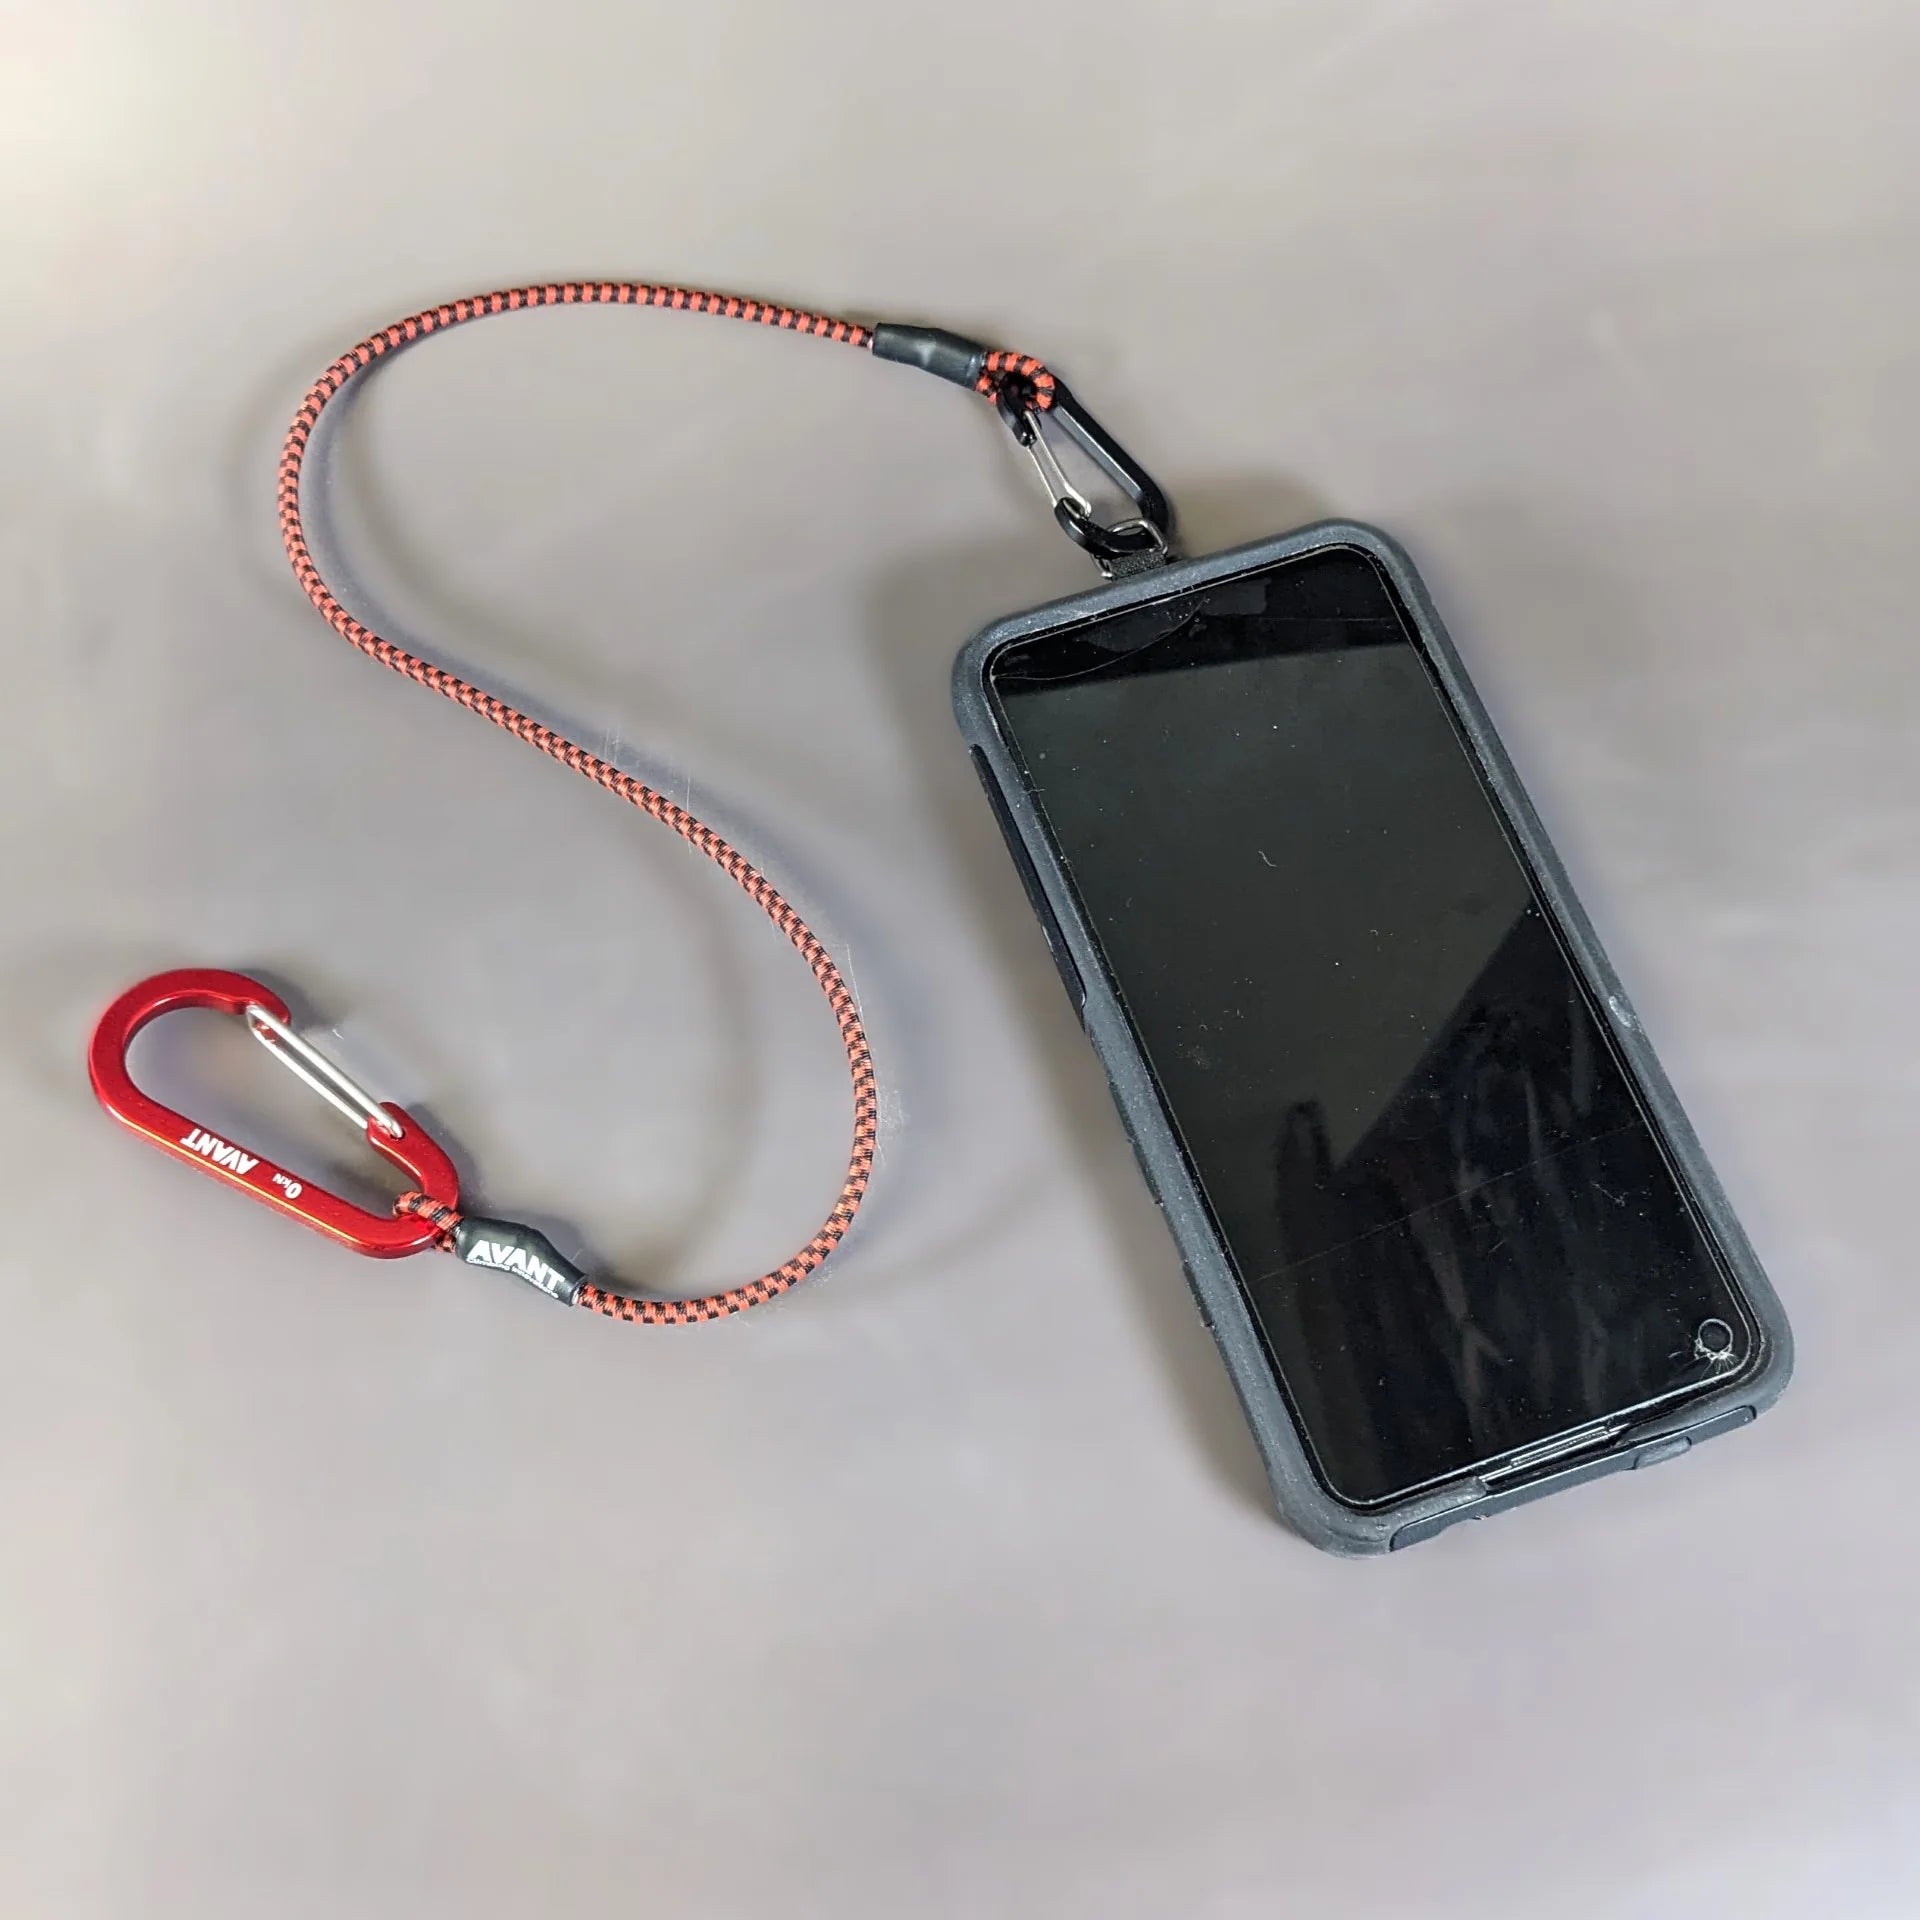 "Tech-Tether" Multipitch Phone Leash